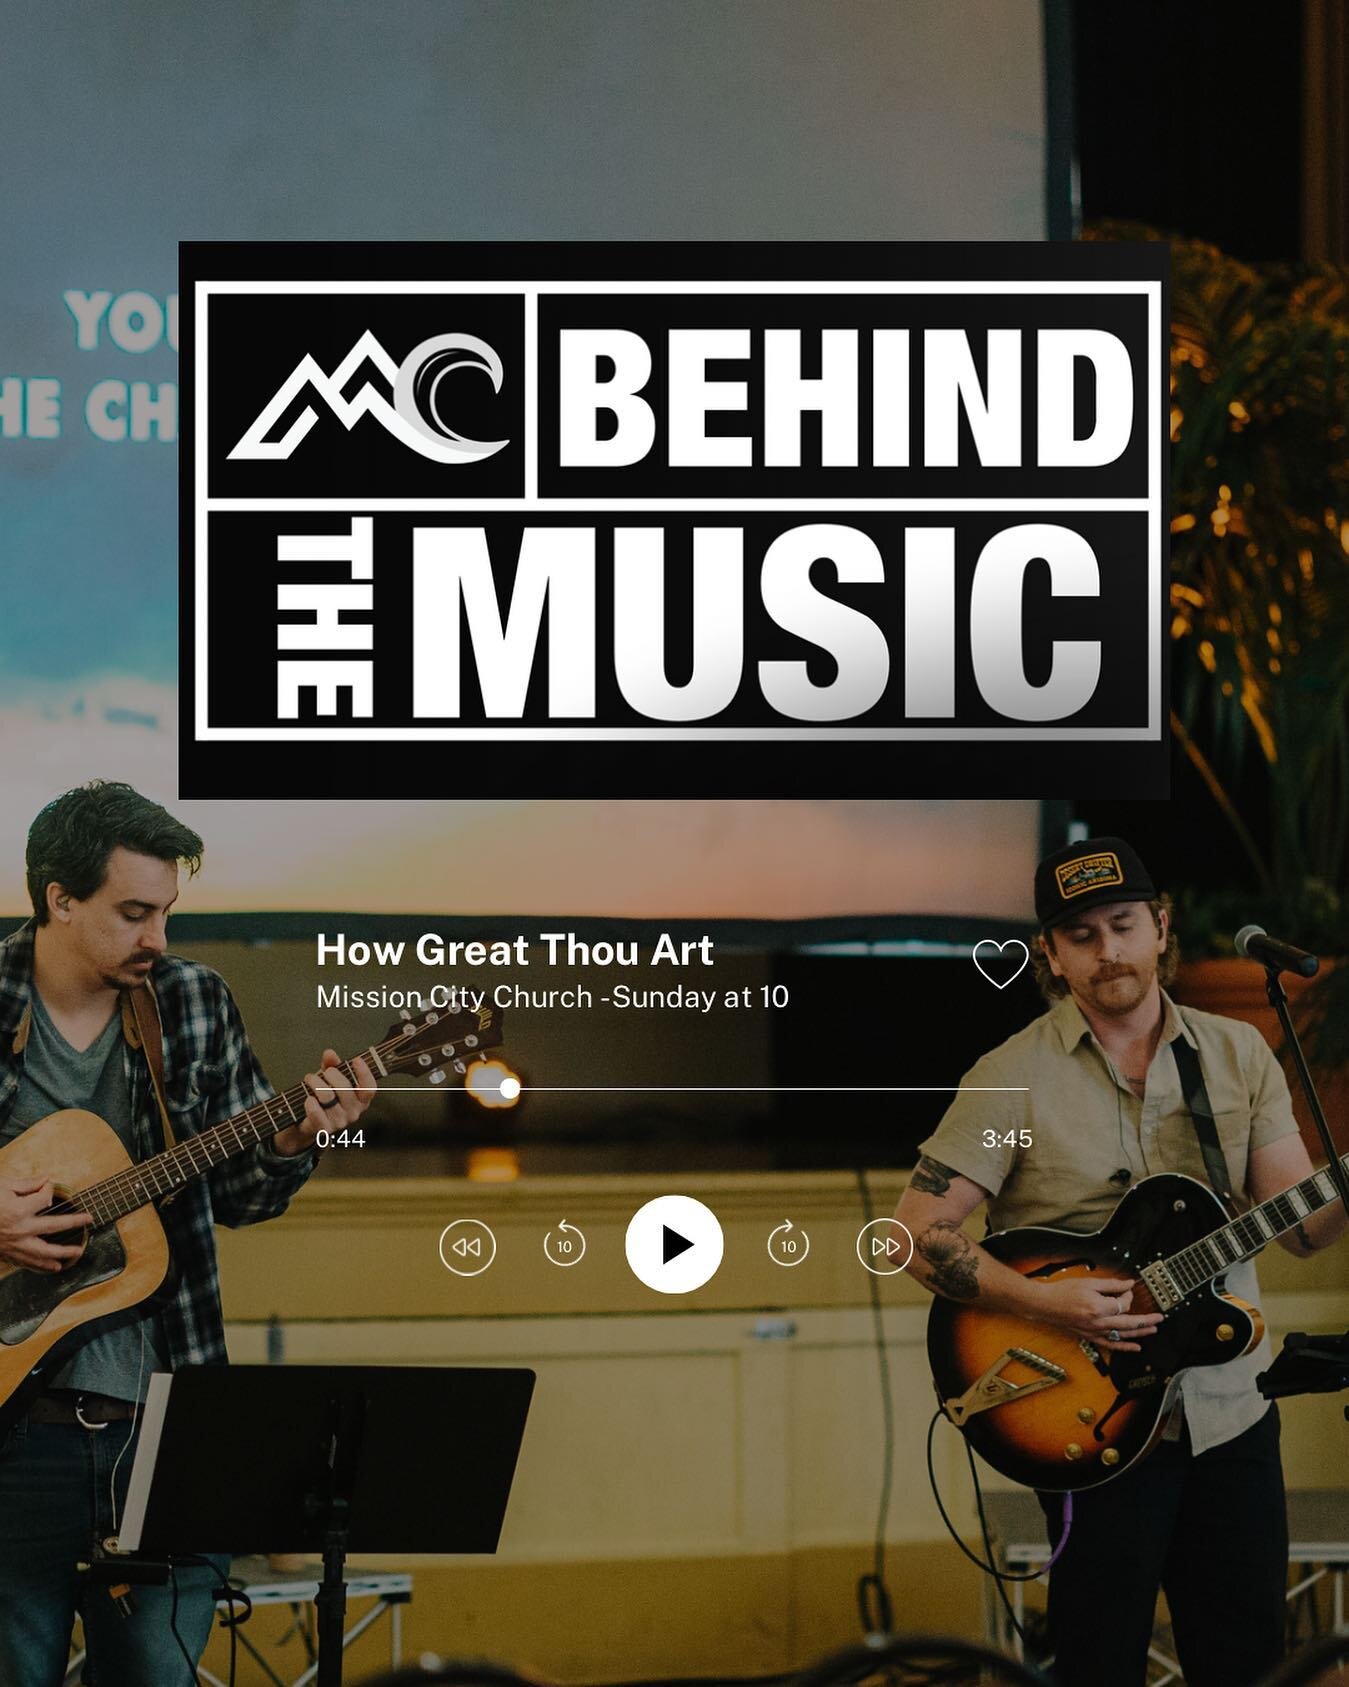 🎶This Sunday join us as we kick off our brand new series &quot;behind the music&quot; where we'll be focusing on why we worship while diving deeper into some classic hymns
🎶